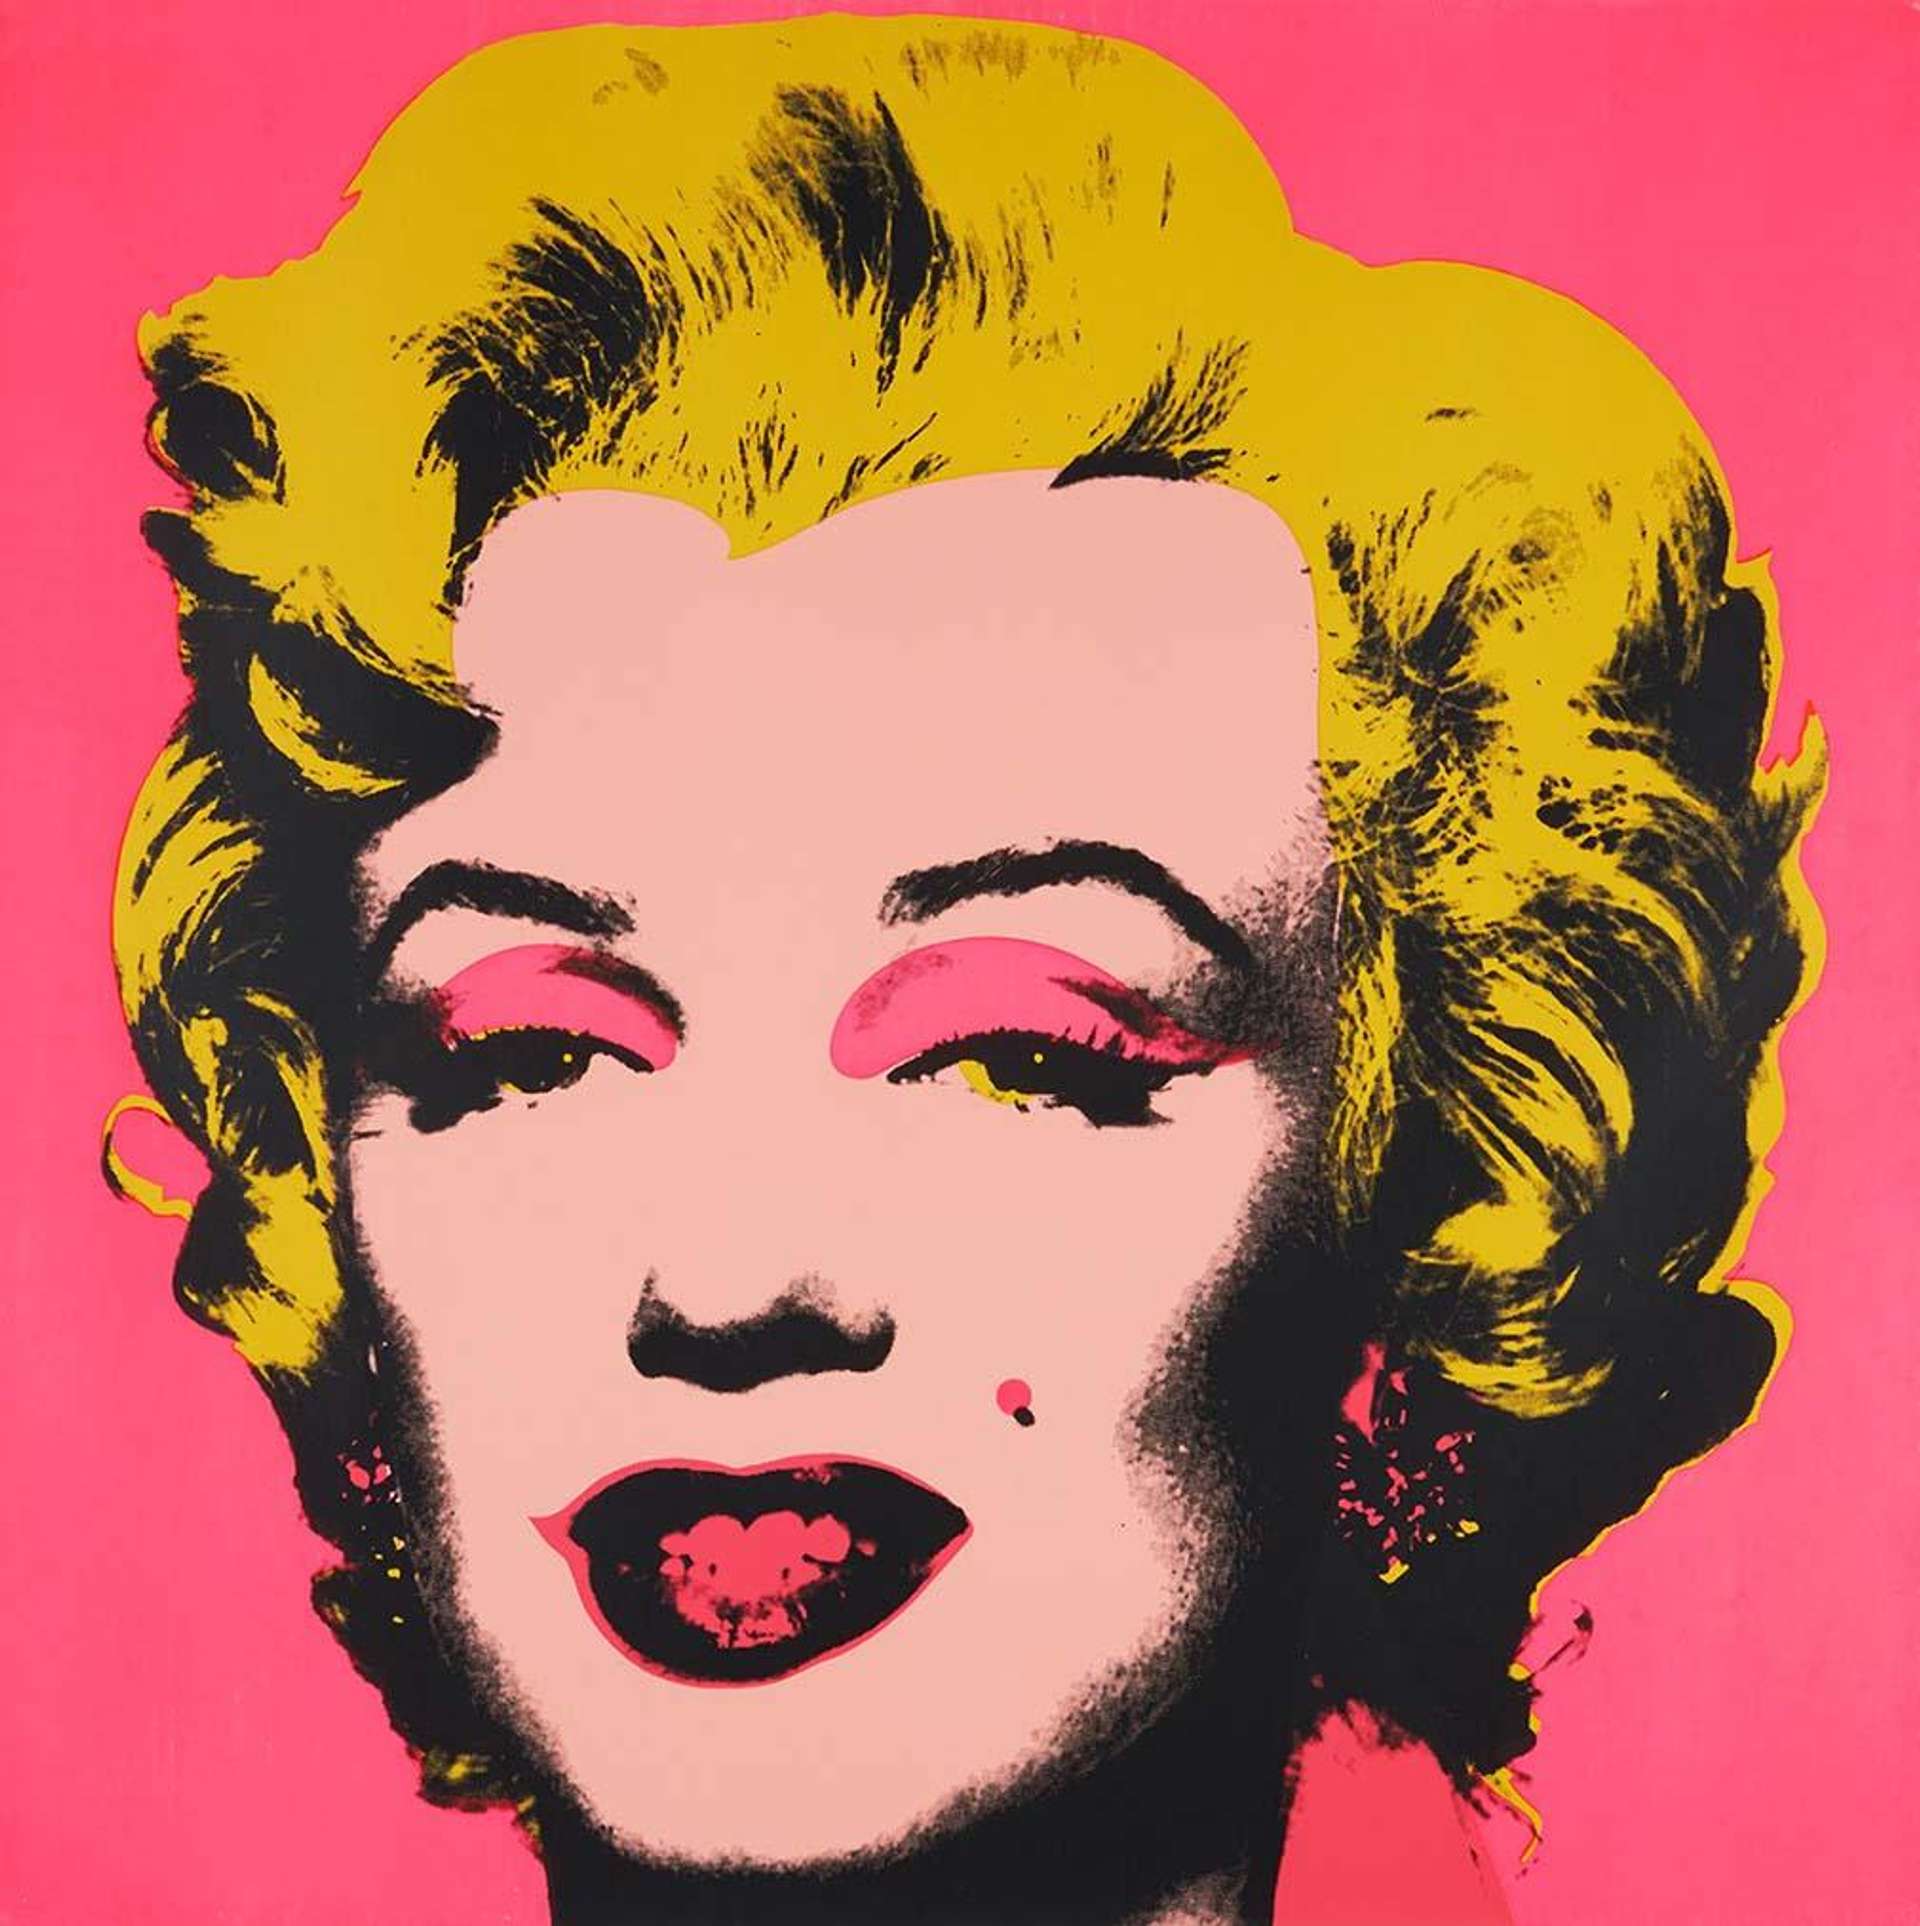 Where To See Andy Warhol’s Most Famous Works